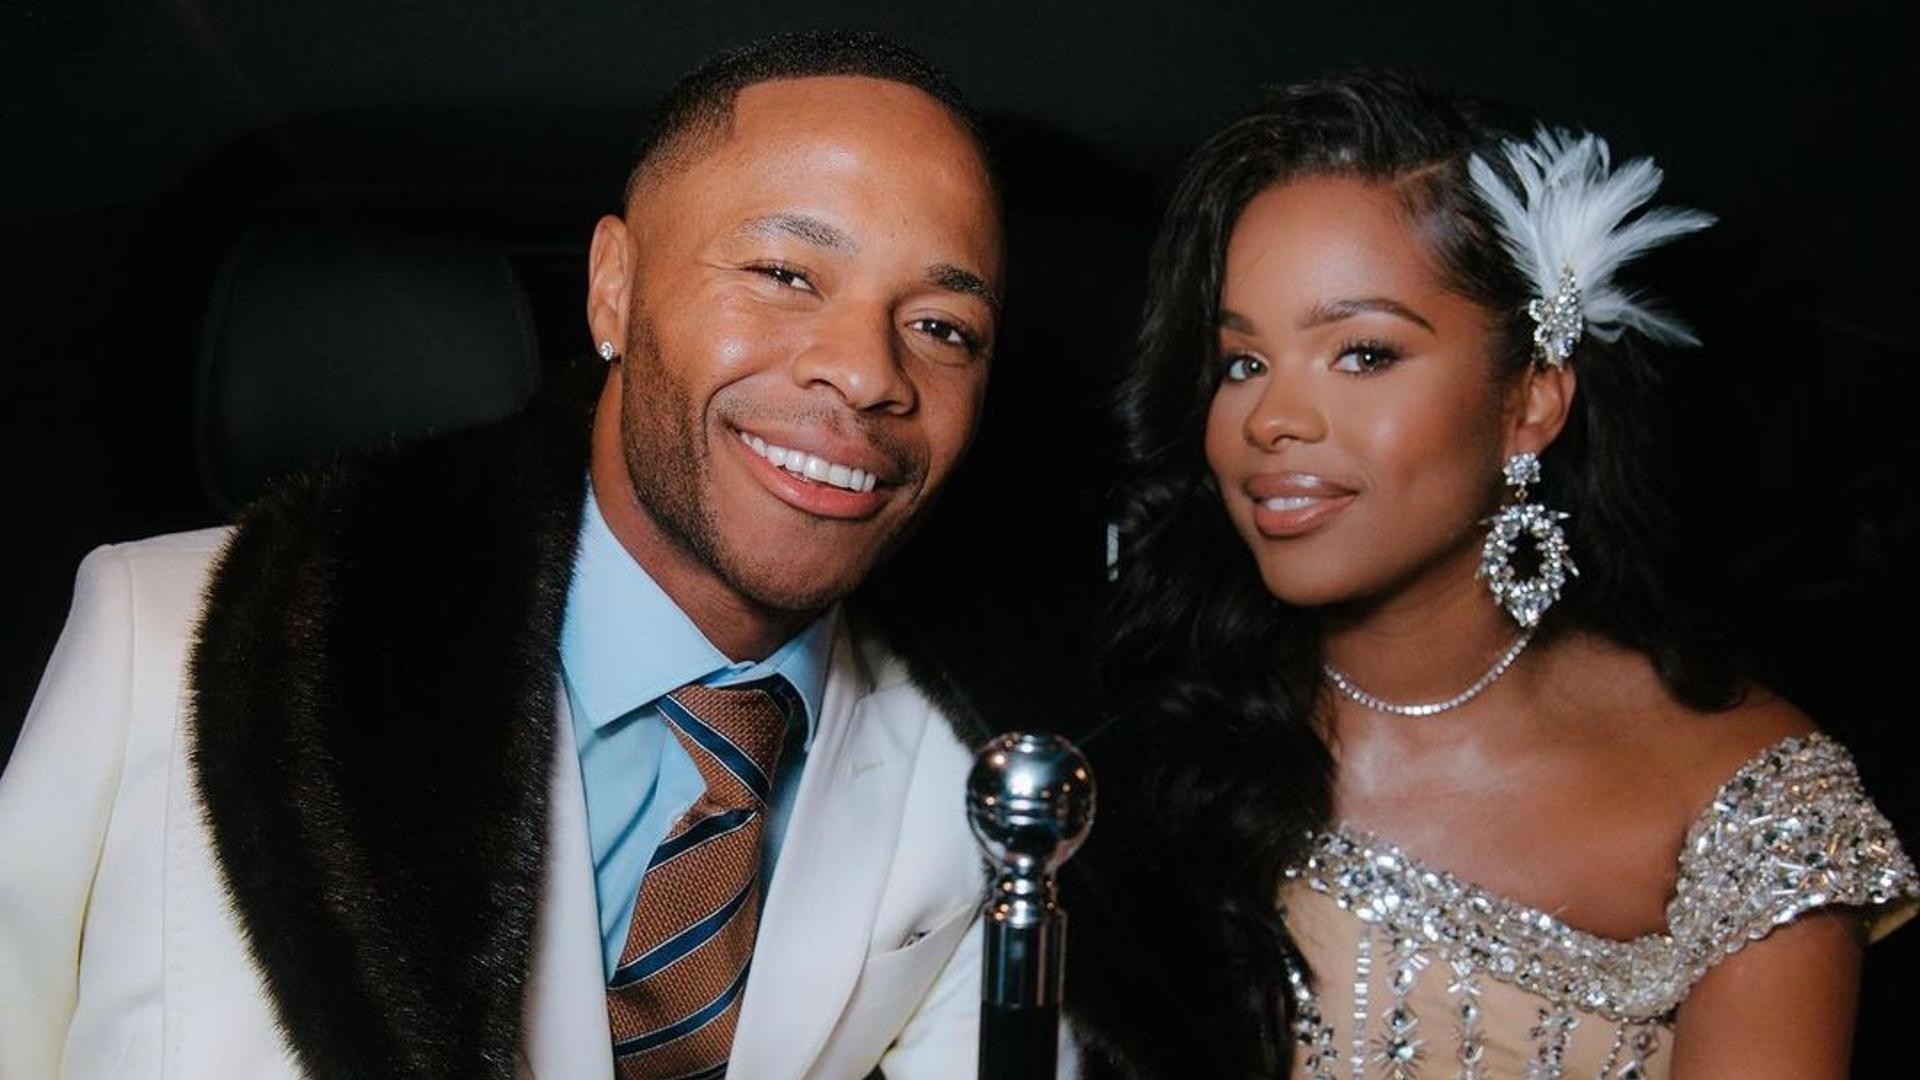 Raheem Sterling 2022 - Net Worth, Salary, Wife and Endorsements